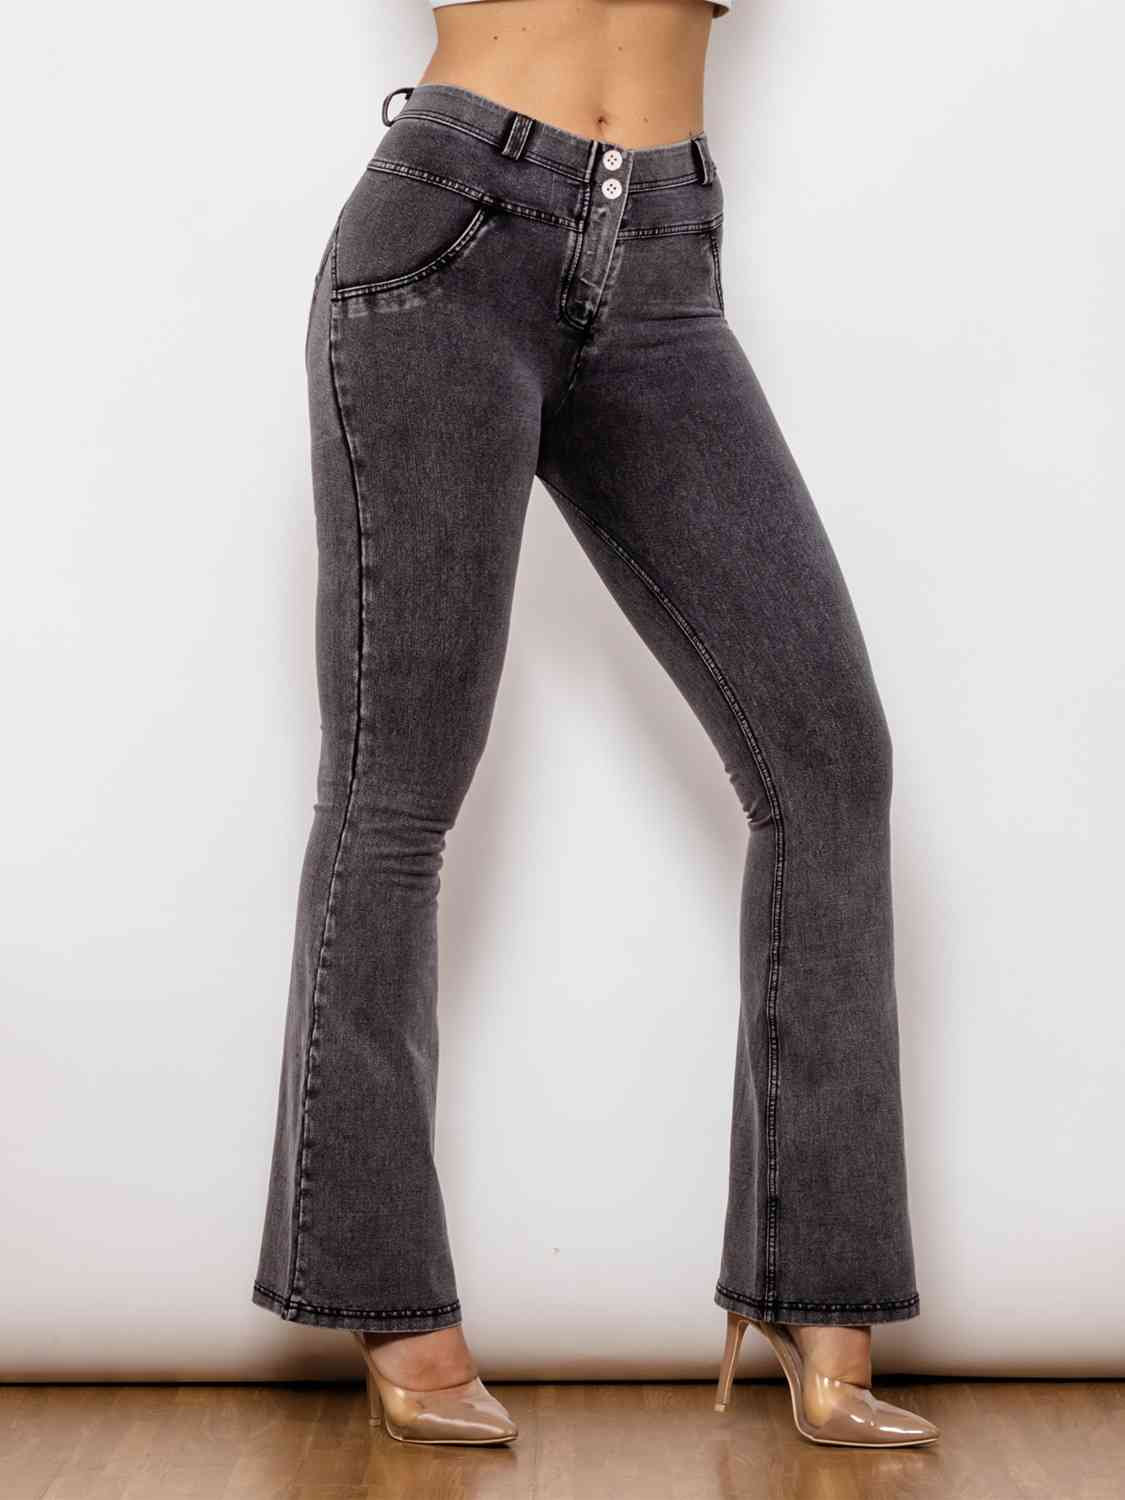 swvws Full Size Long Bootcut Jeans